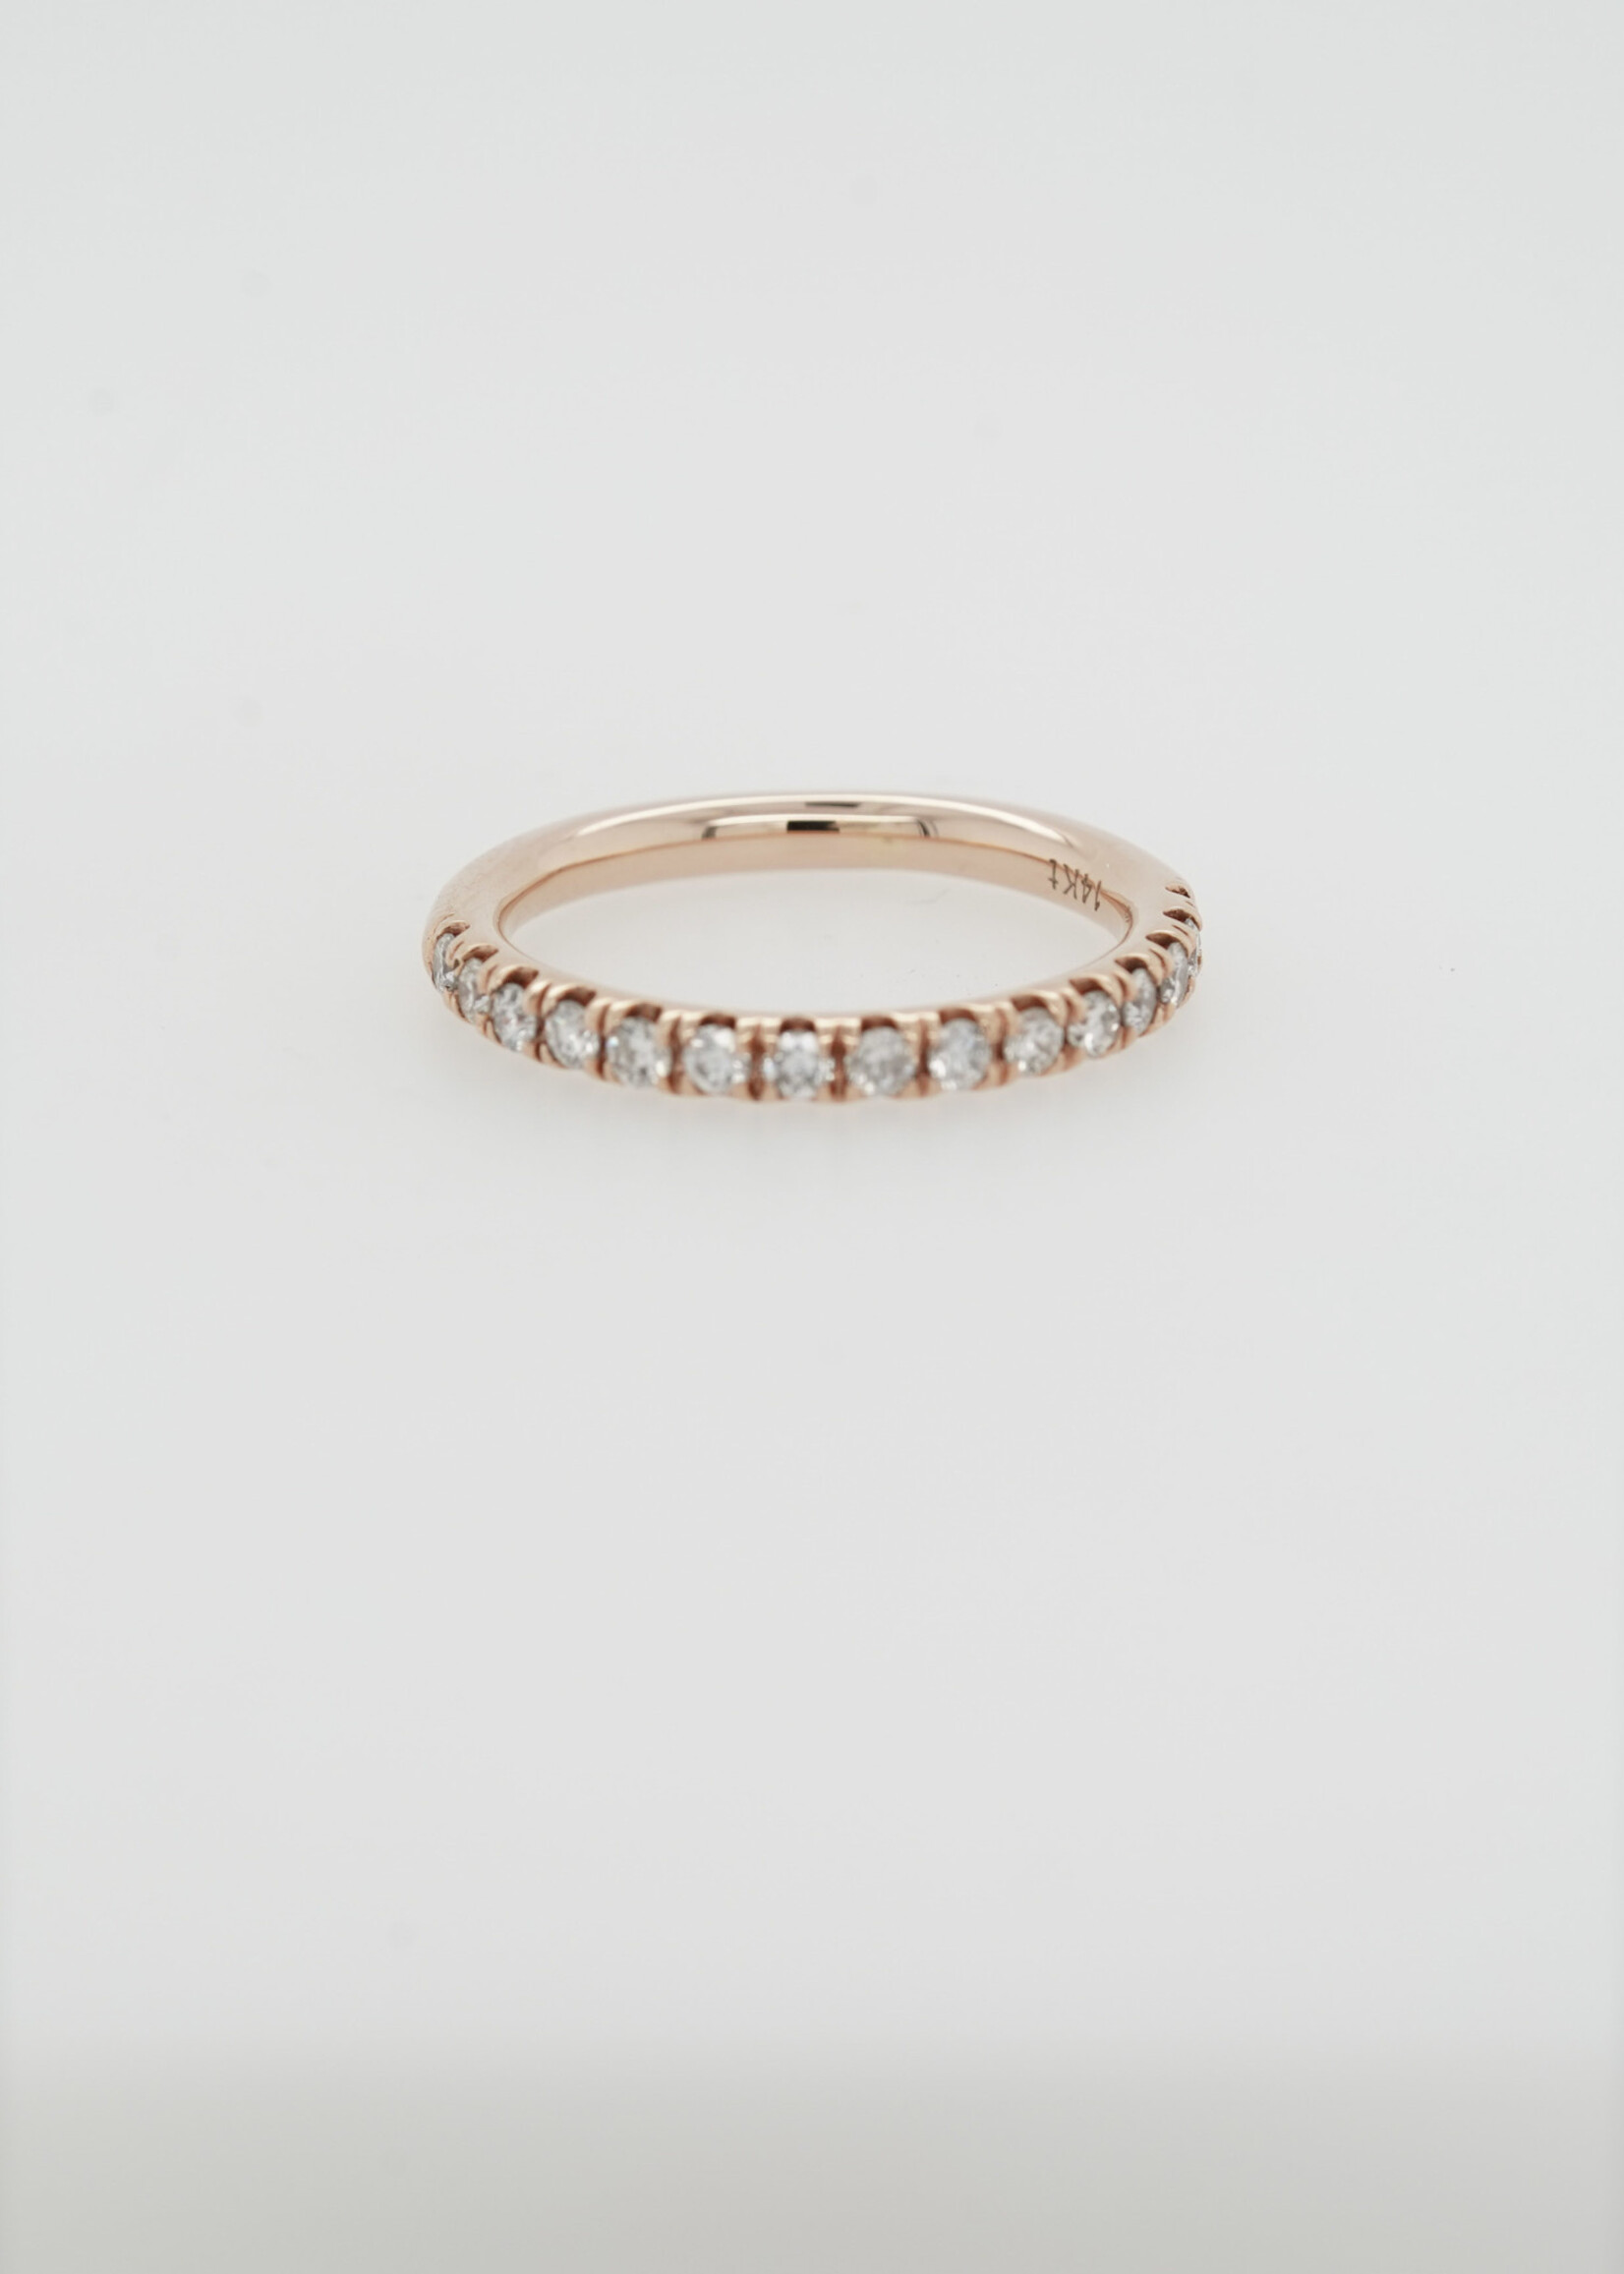 14KR 2.72g .40ctw Diamond Stackable Band (size 6)